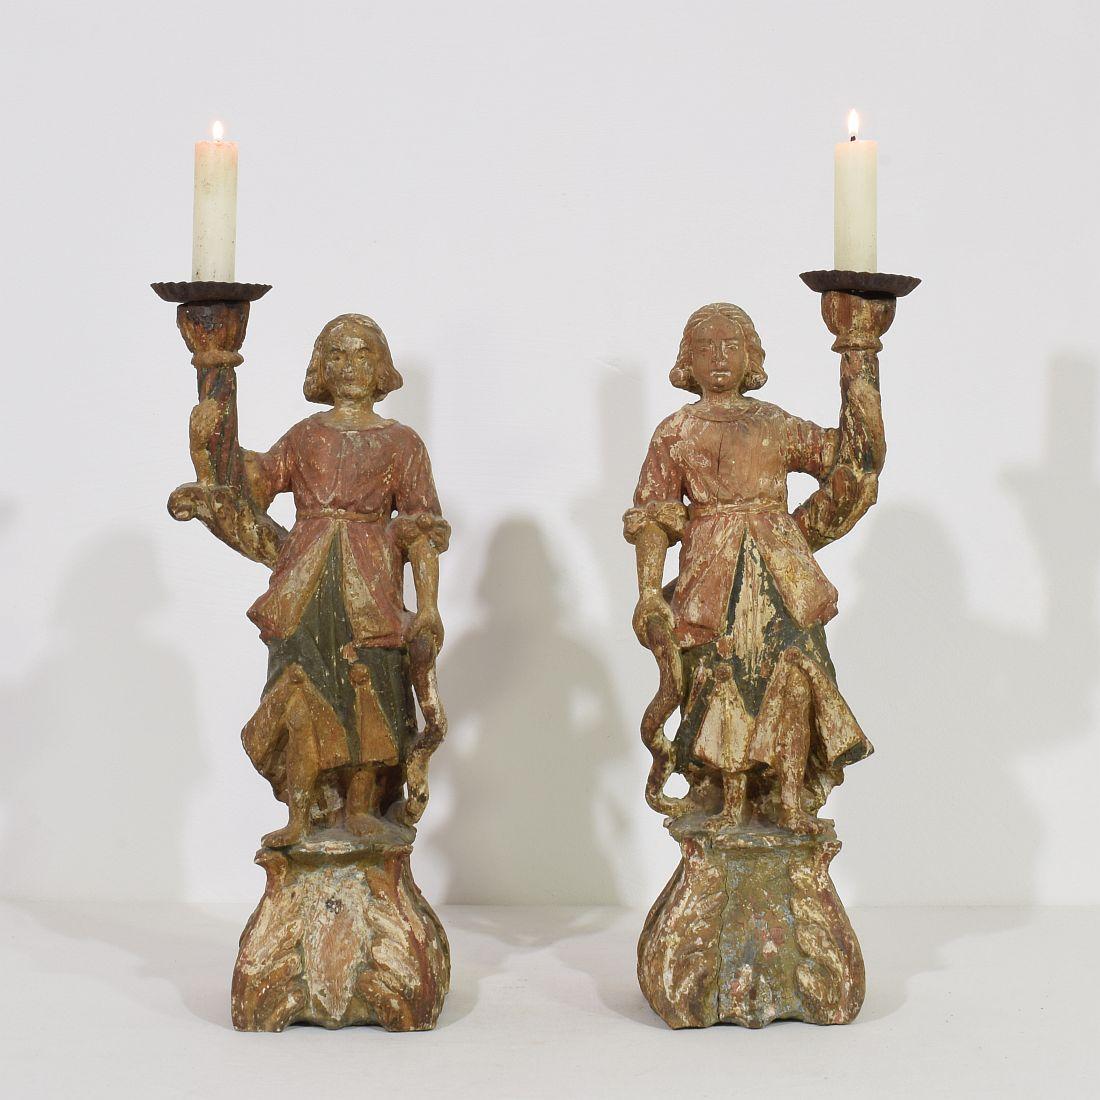 Wonderful pair of angelfigures with candleholders. Beautiful traces of the original paint visible, 
Italy, circa 1650-1700. Weathered, small losses
More pictures available on request.